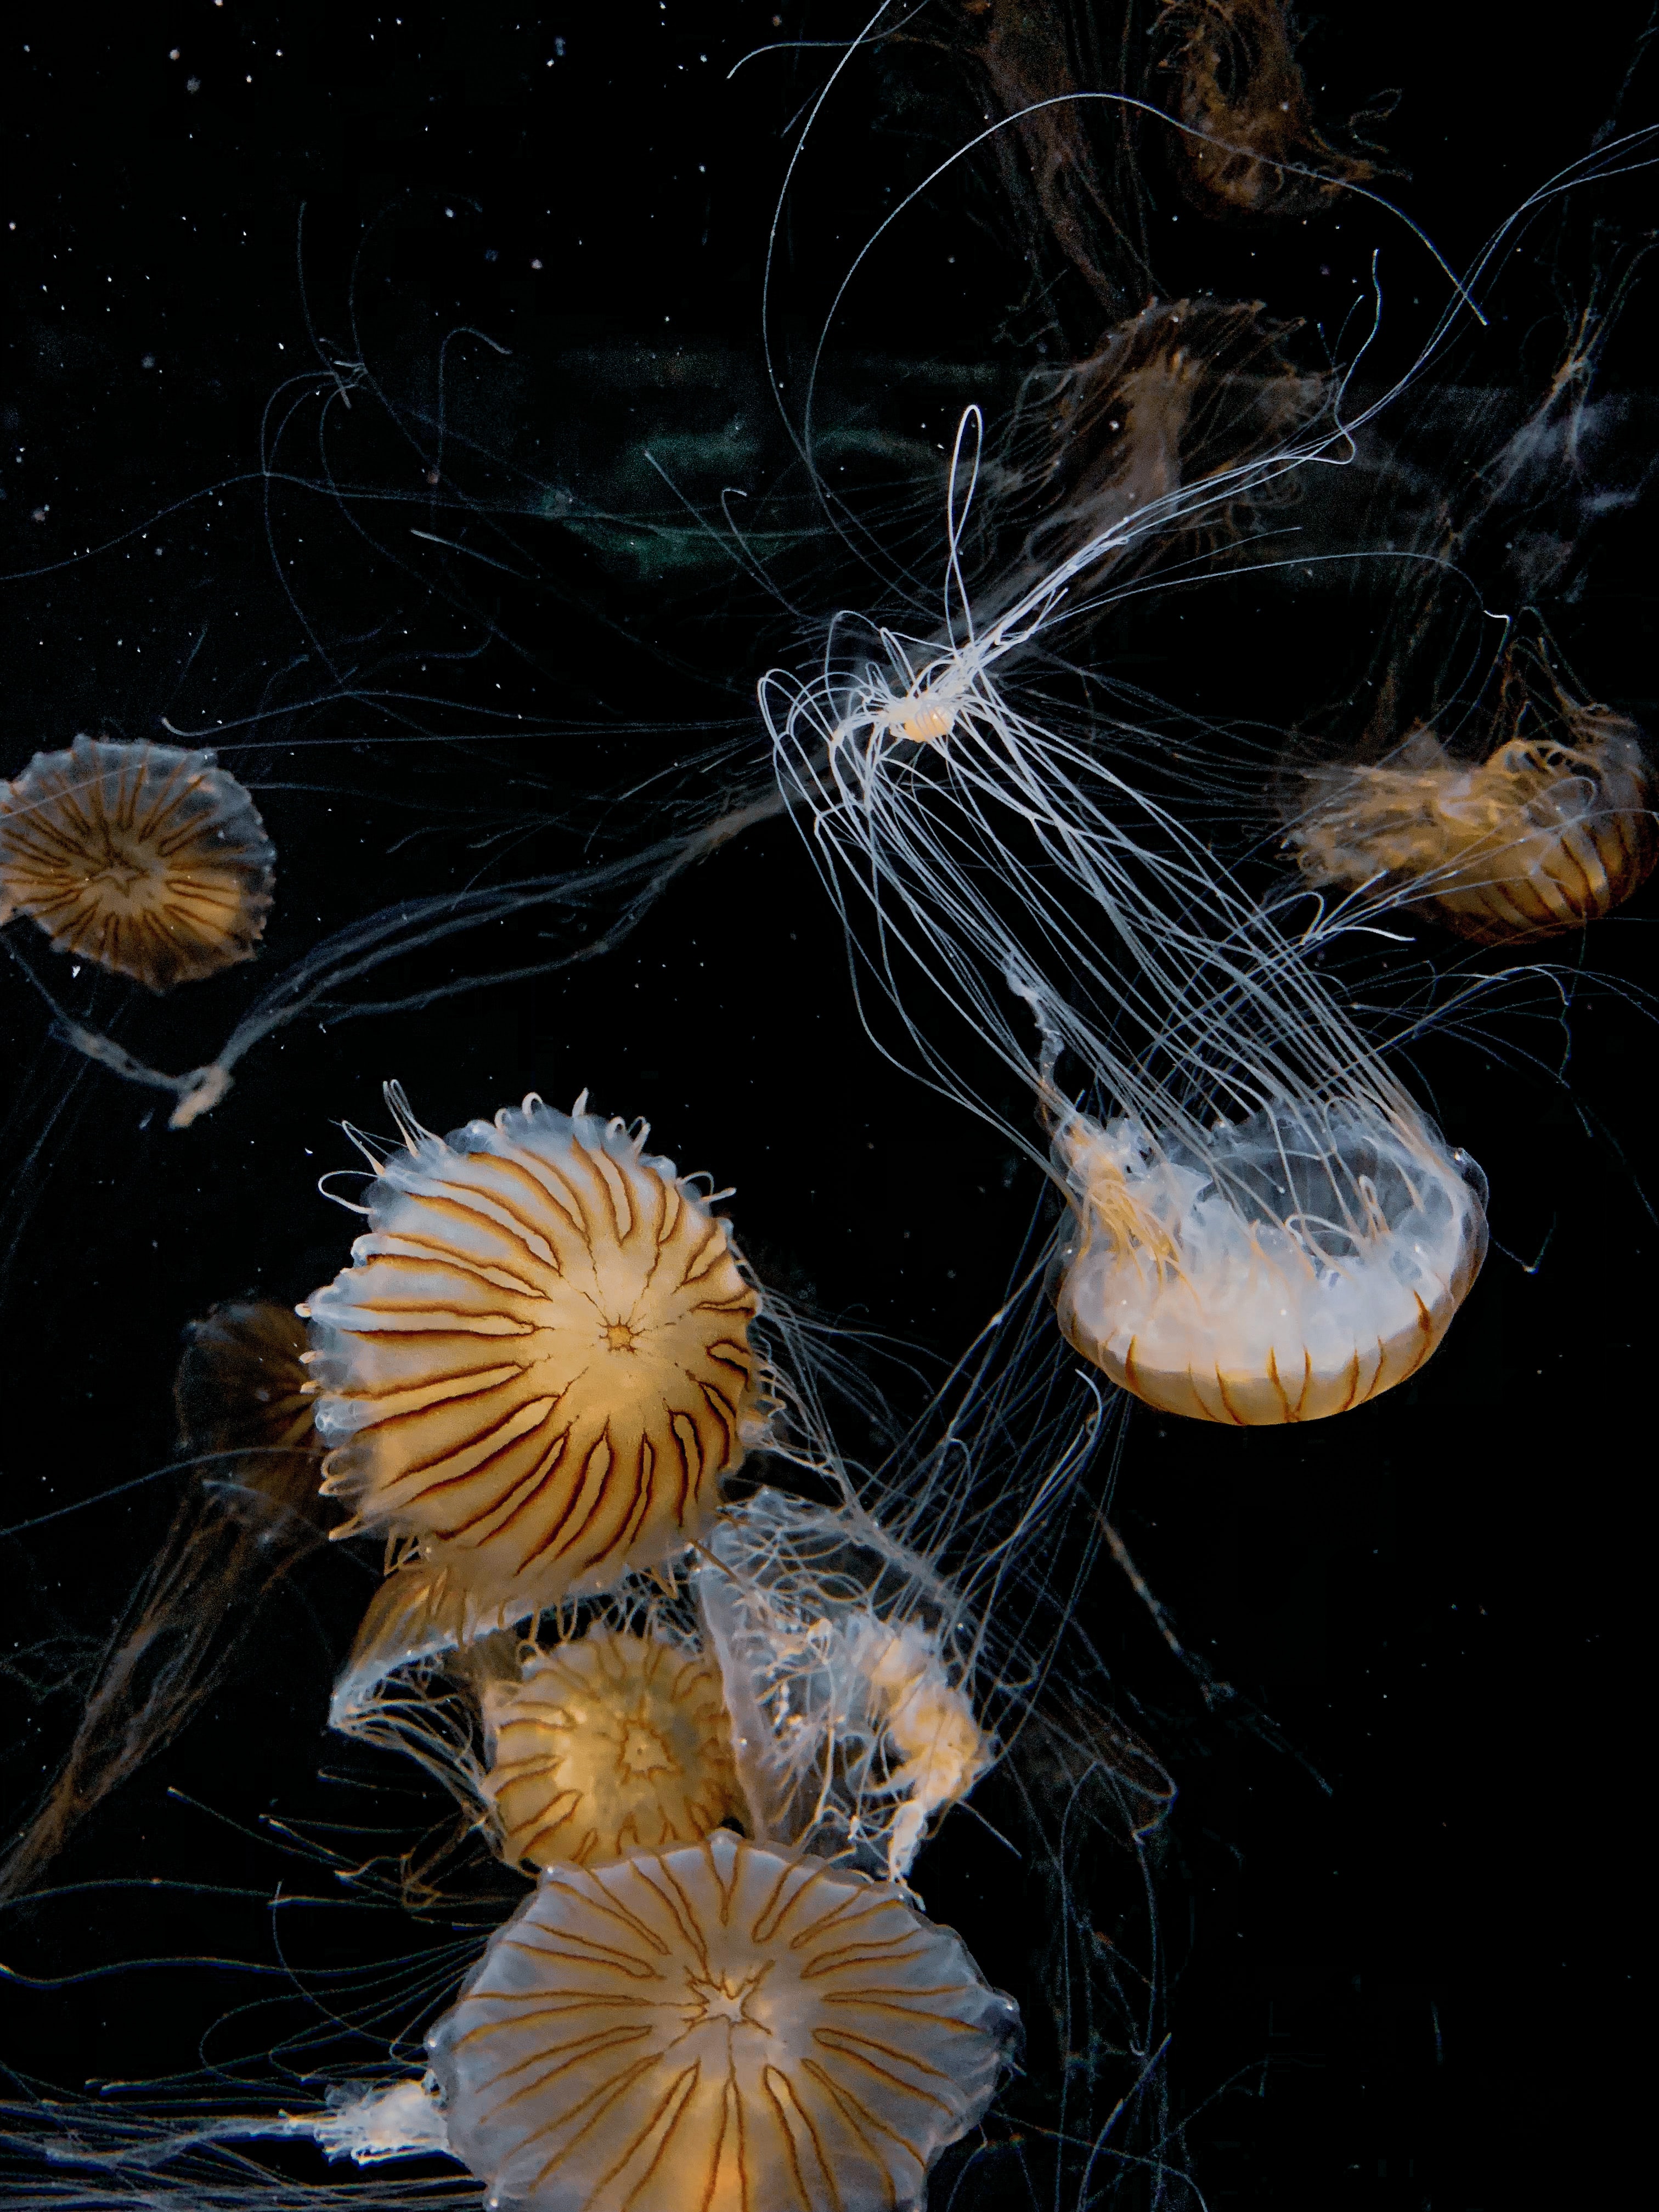 jellyfish, animals, black, tentacle, handsomely, it's beautiful